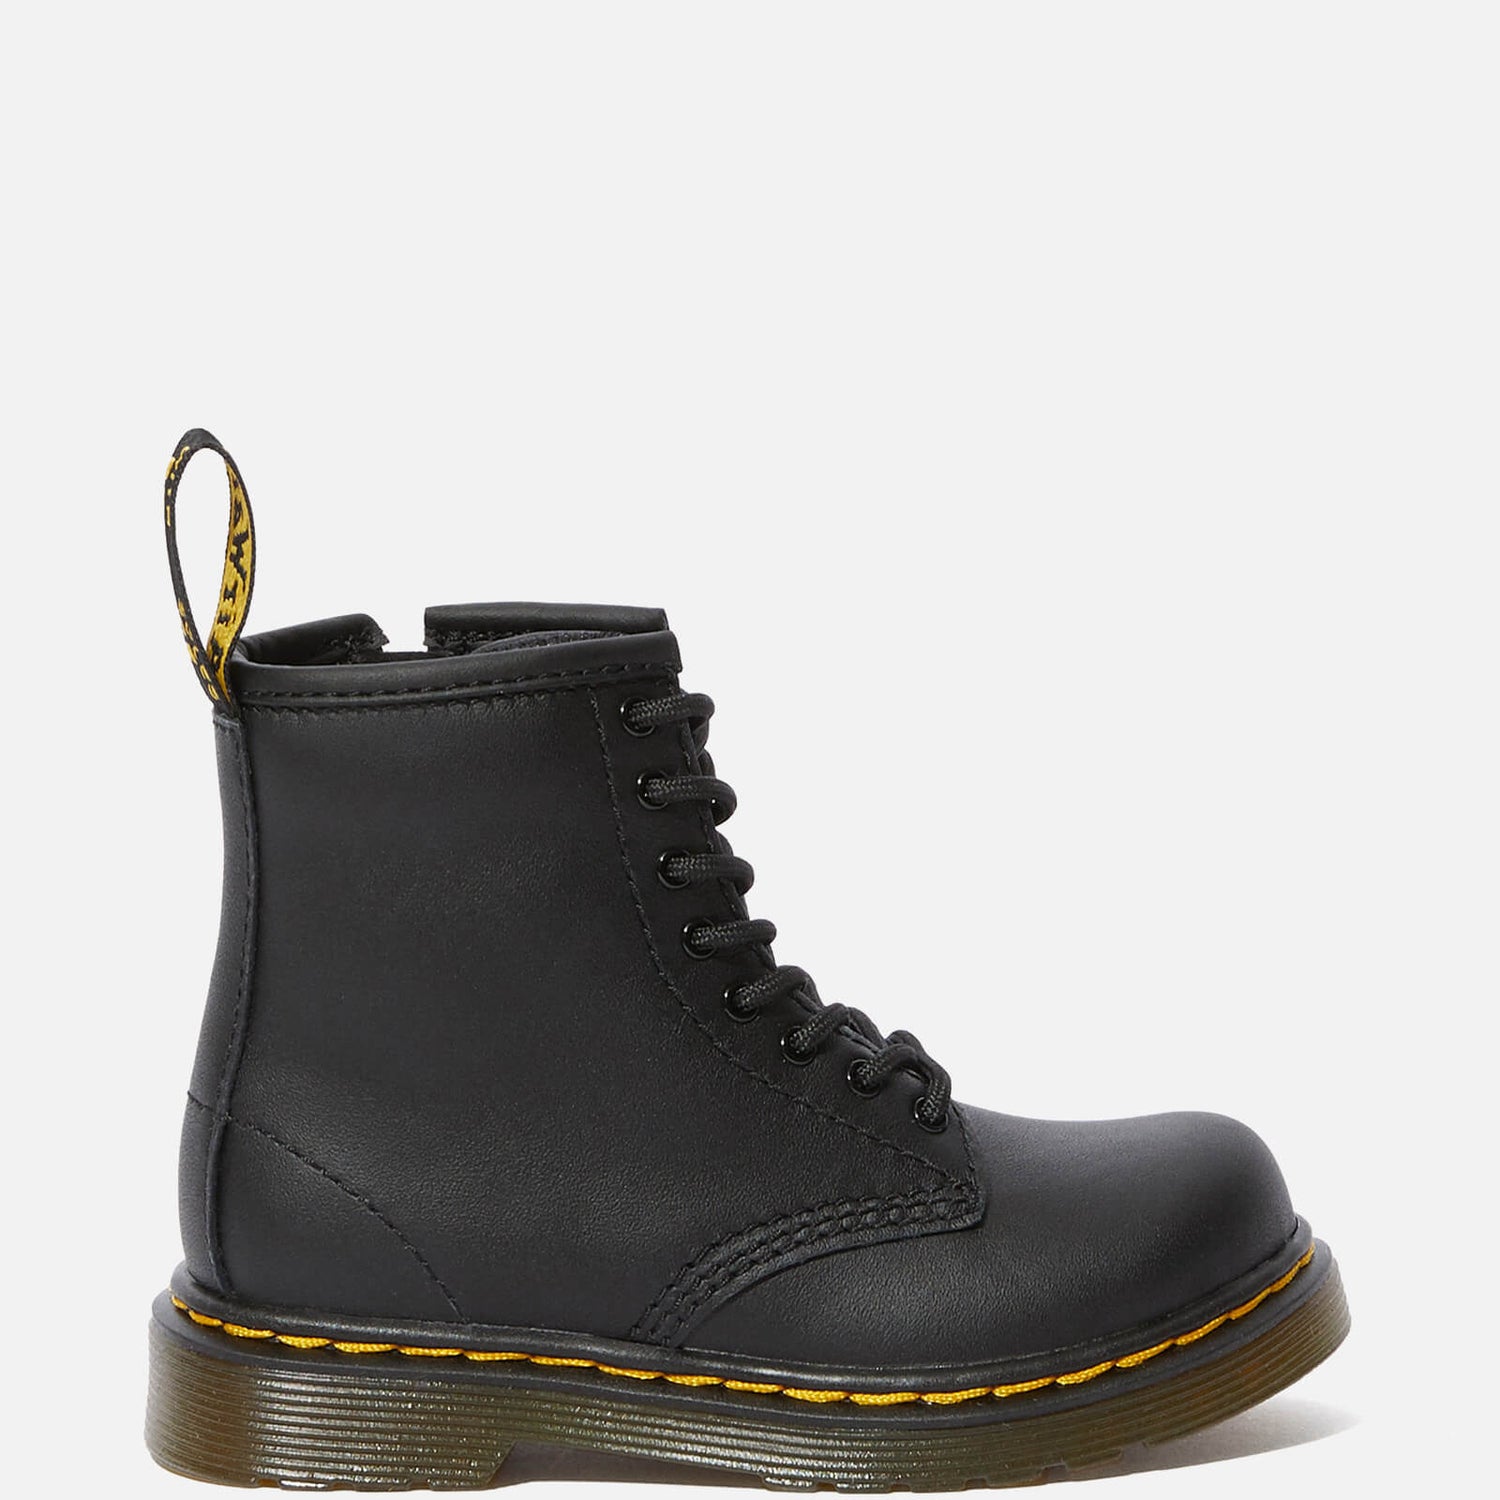 Dr. Martens Toddlers' 1460 Leather Lace-Up Boots - Black - UK 5.5 Toddler